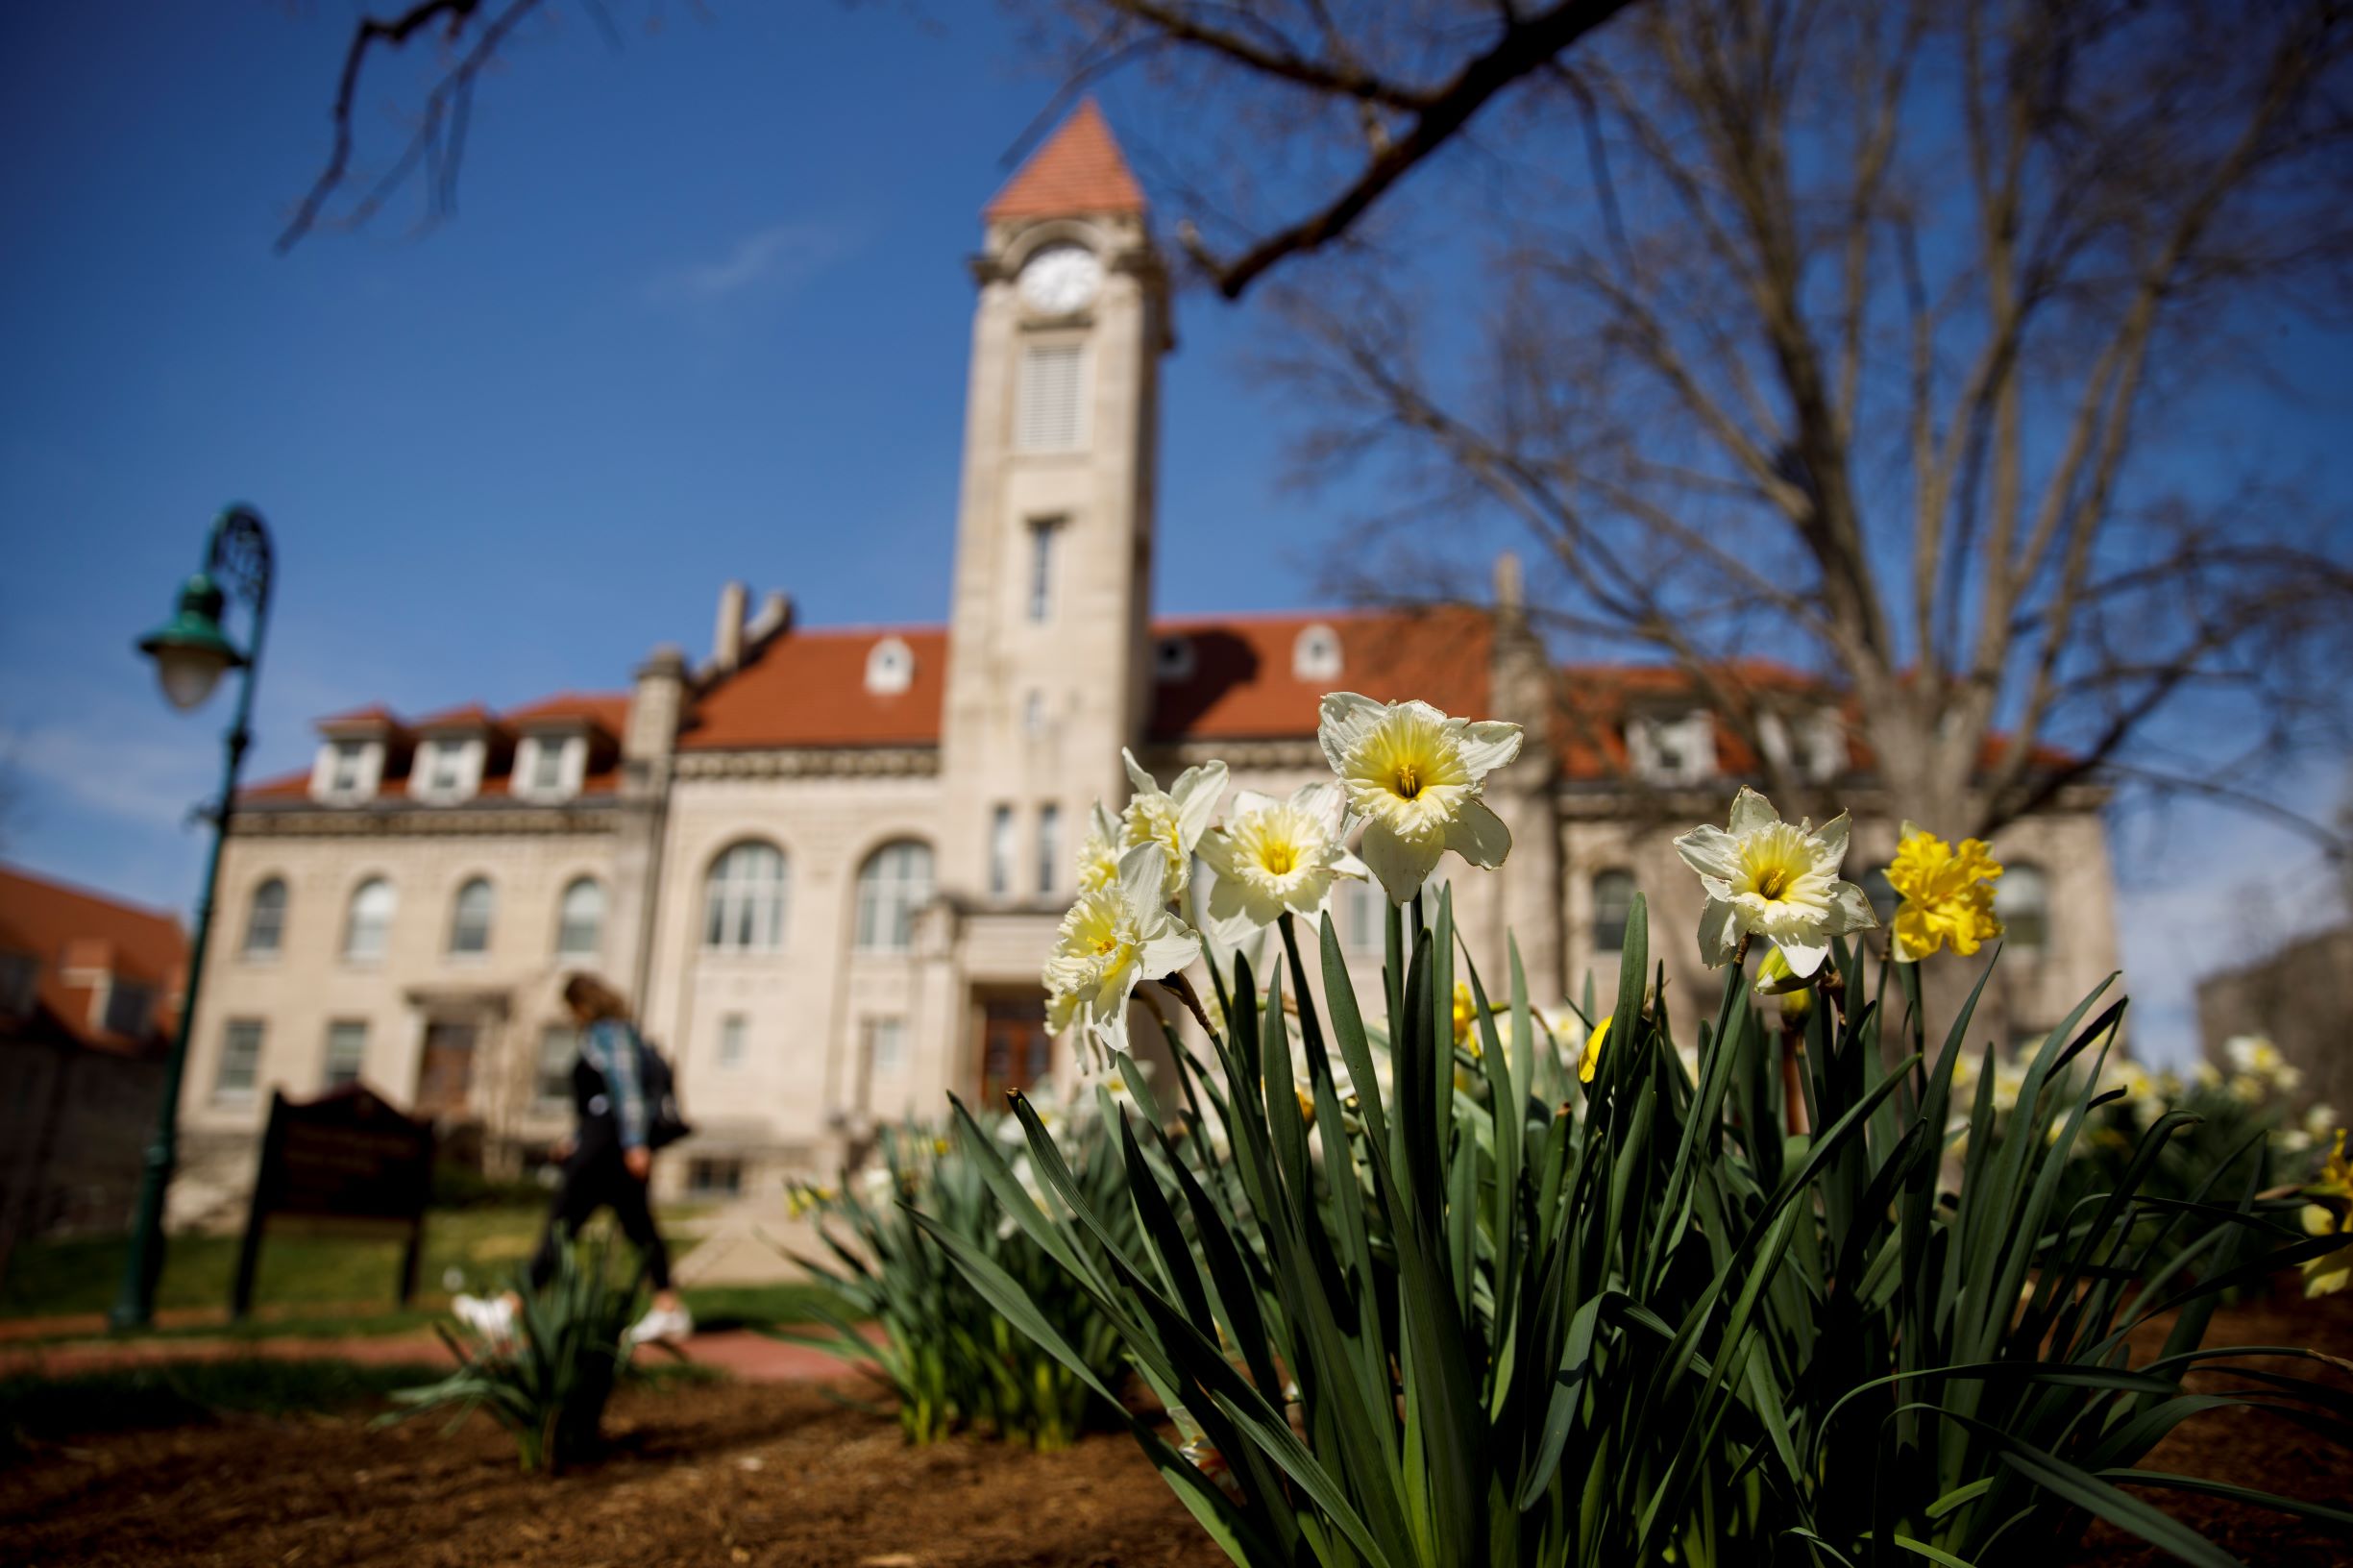 IU enrollment slightly up from last year, growth in Bloomington